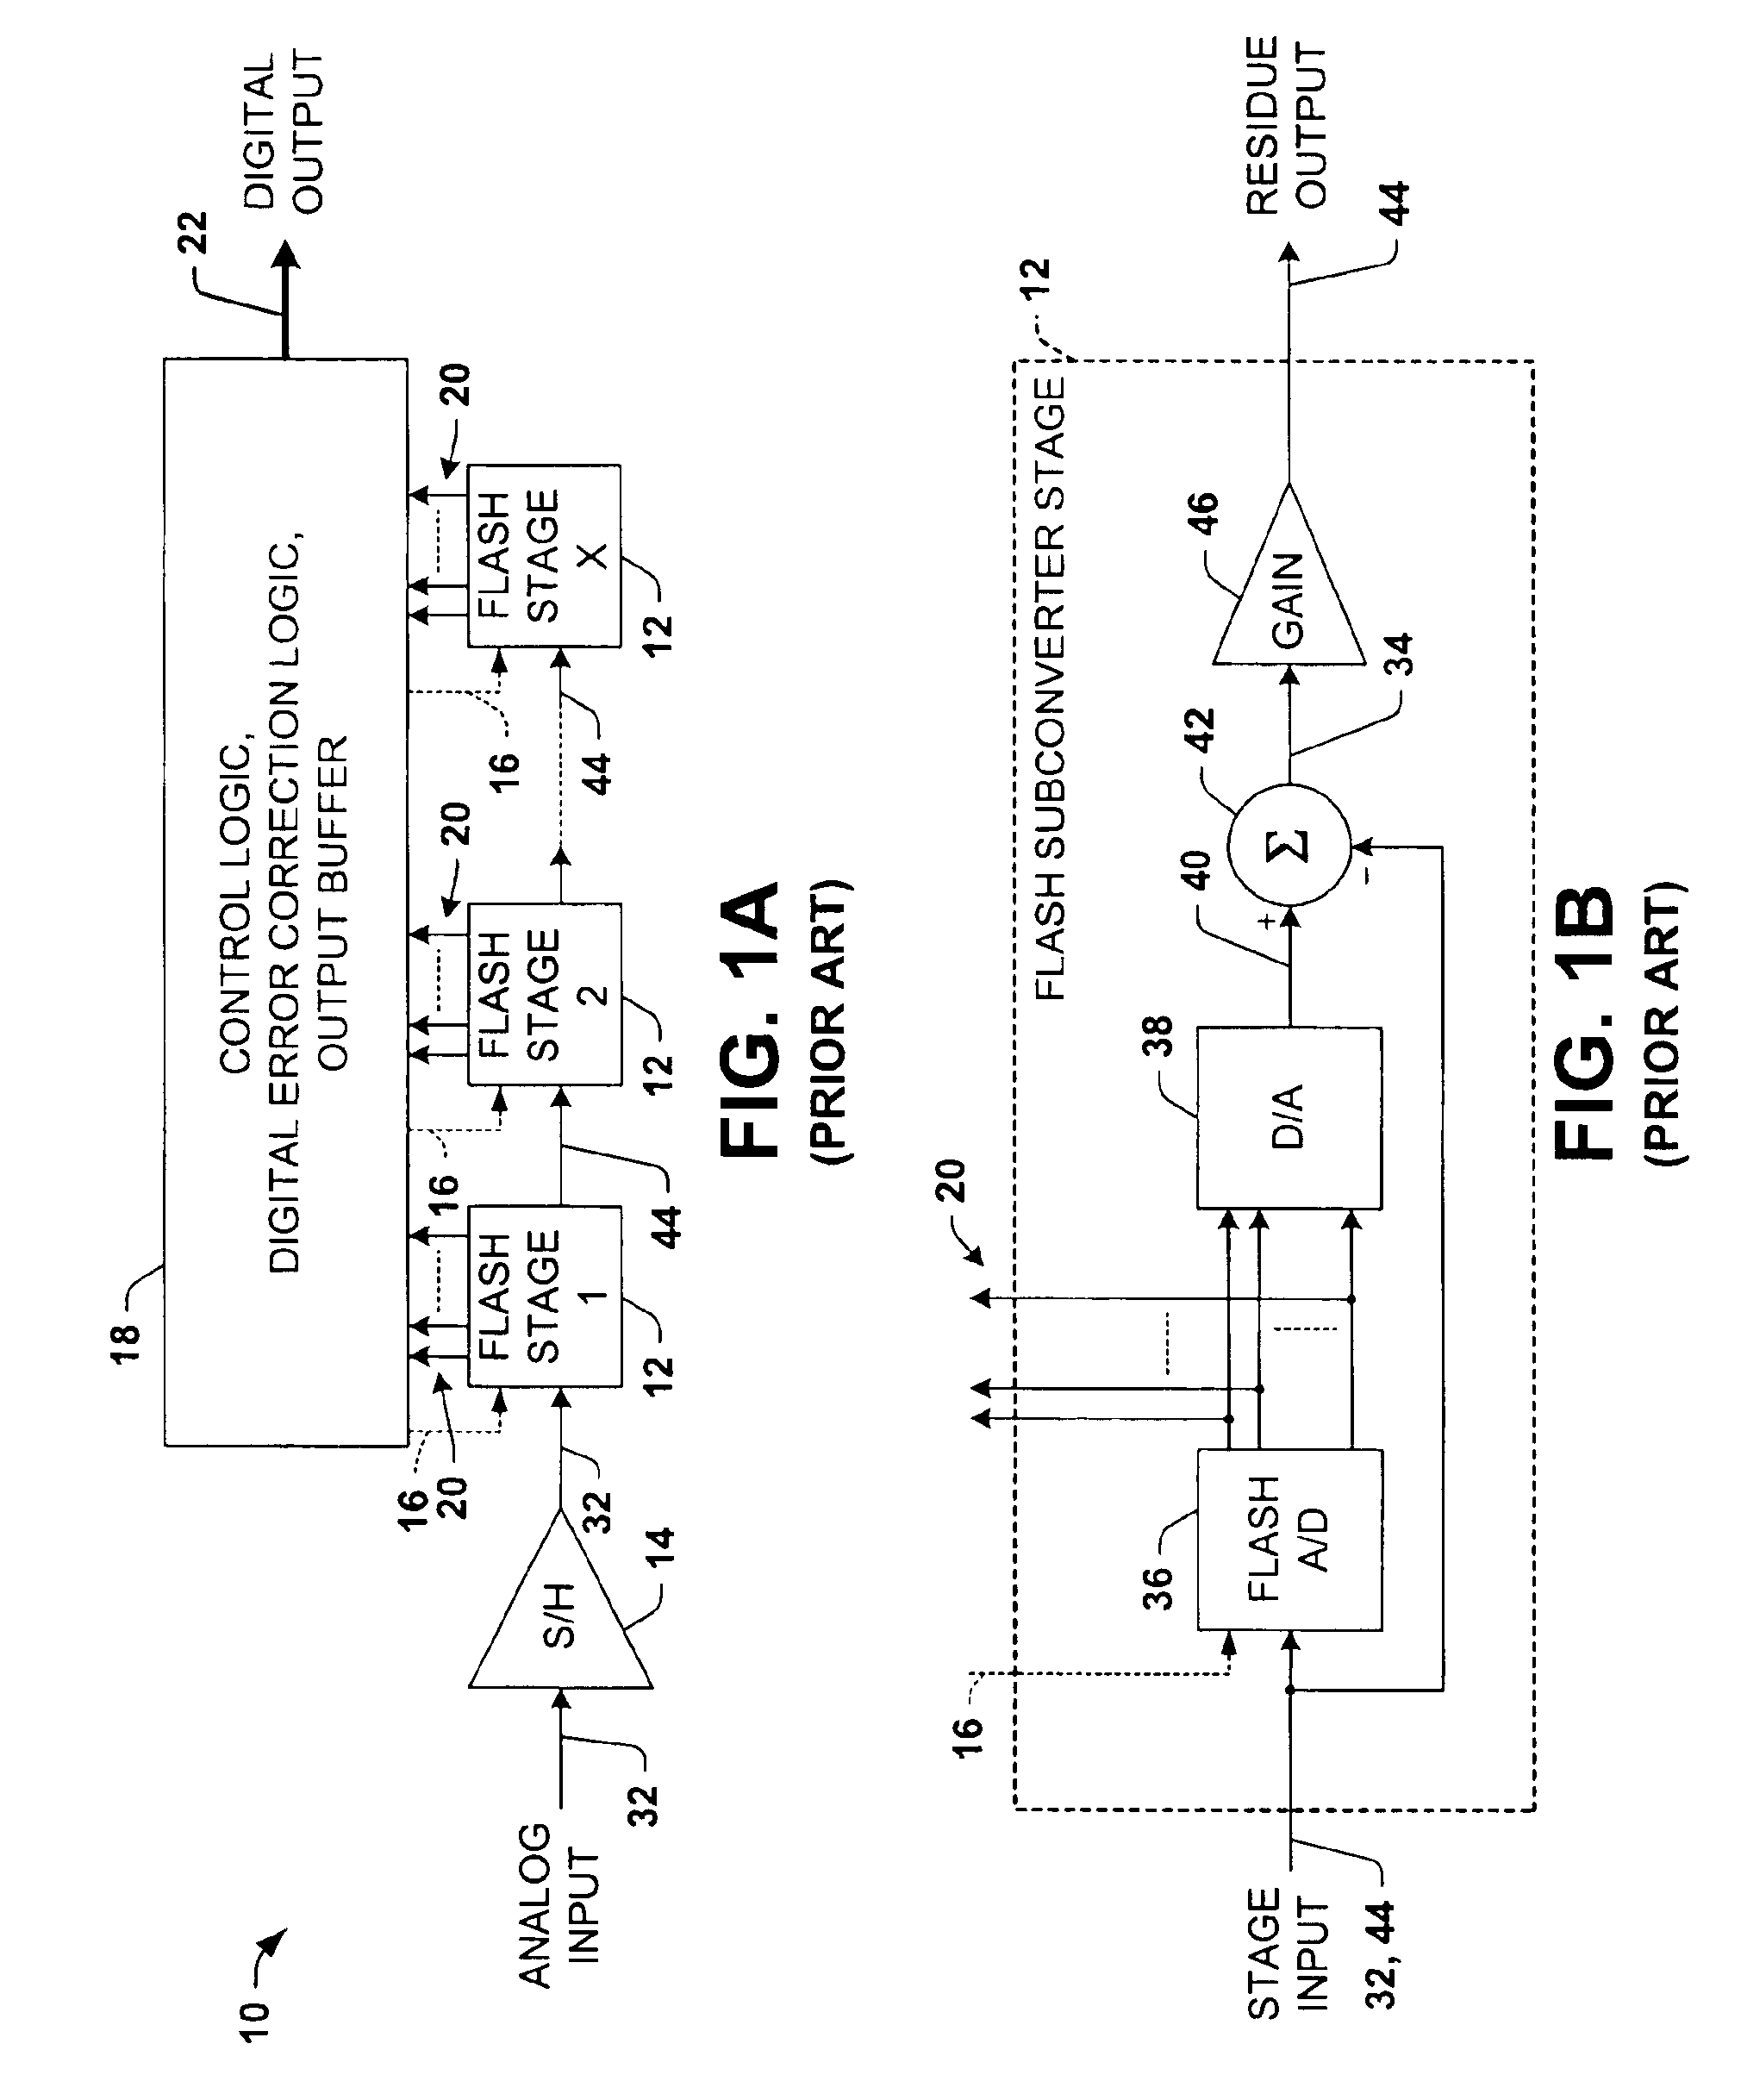 Differential pipelined analog to digital converter with successive approximation register subconverter stages using thermometer coding